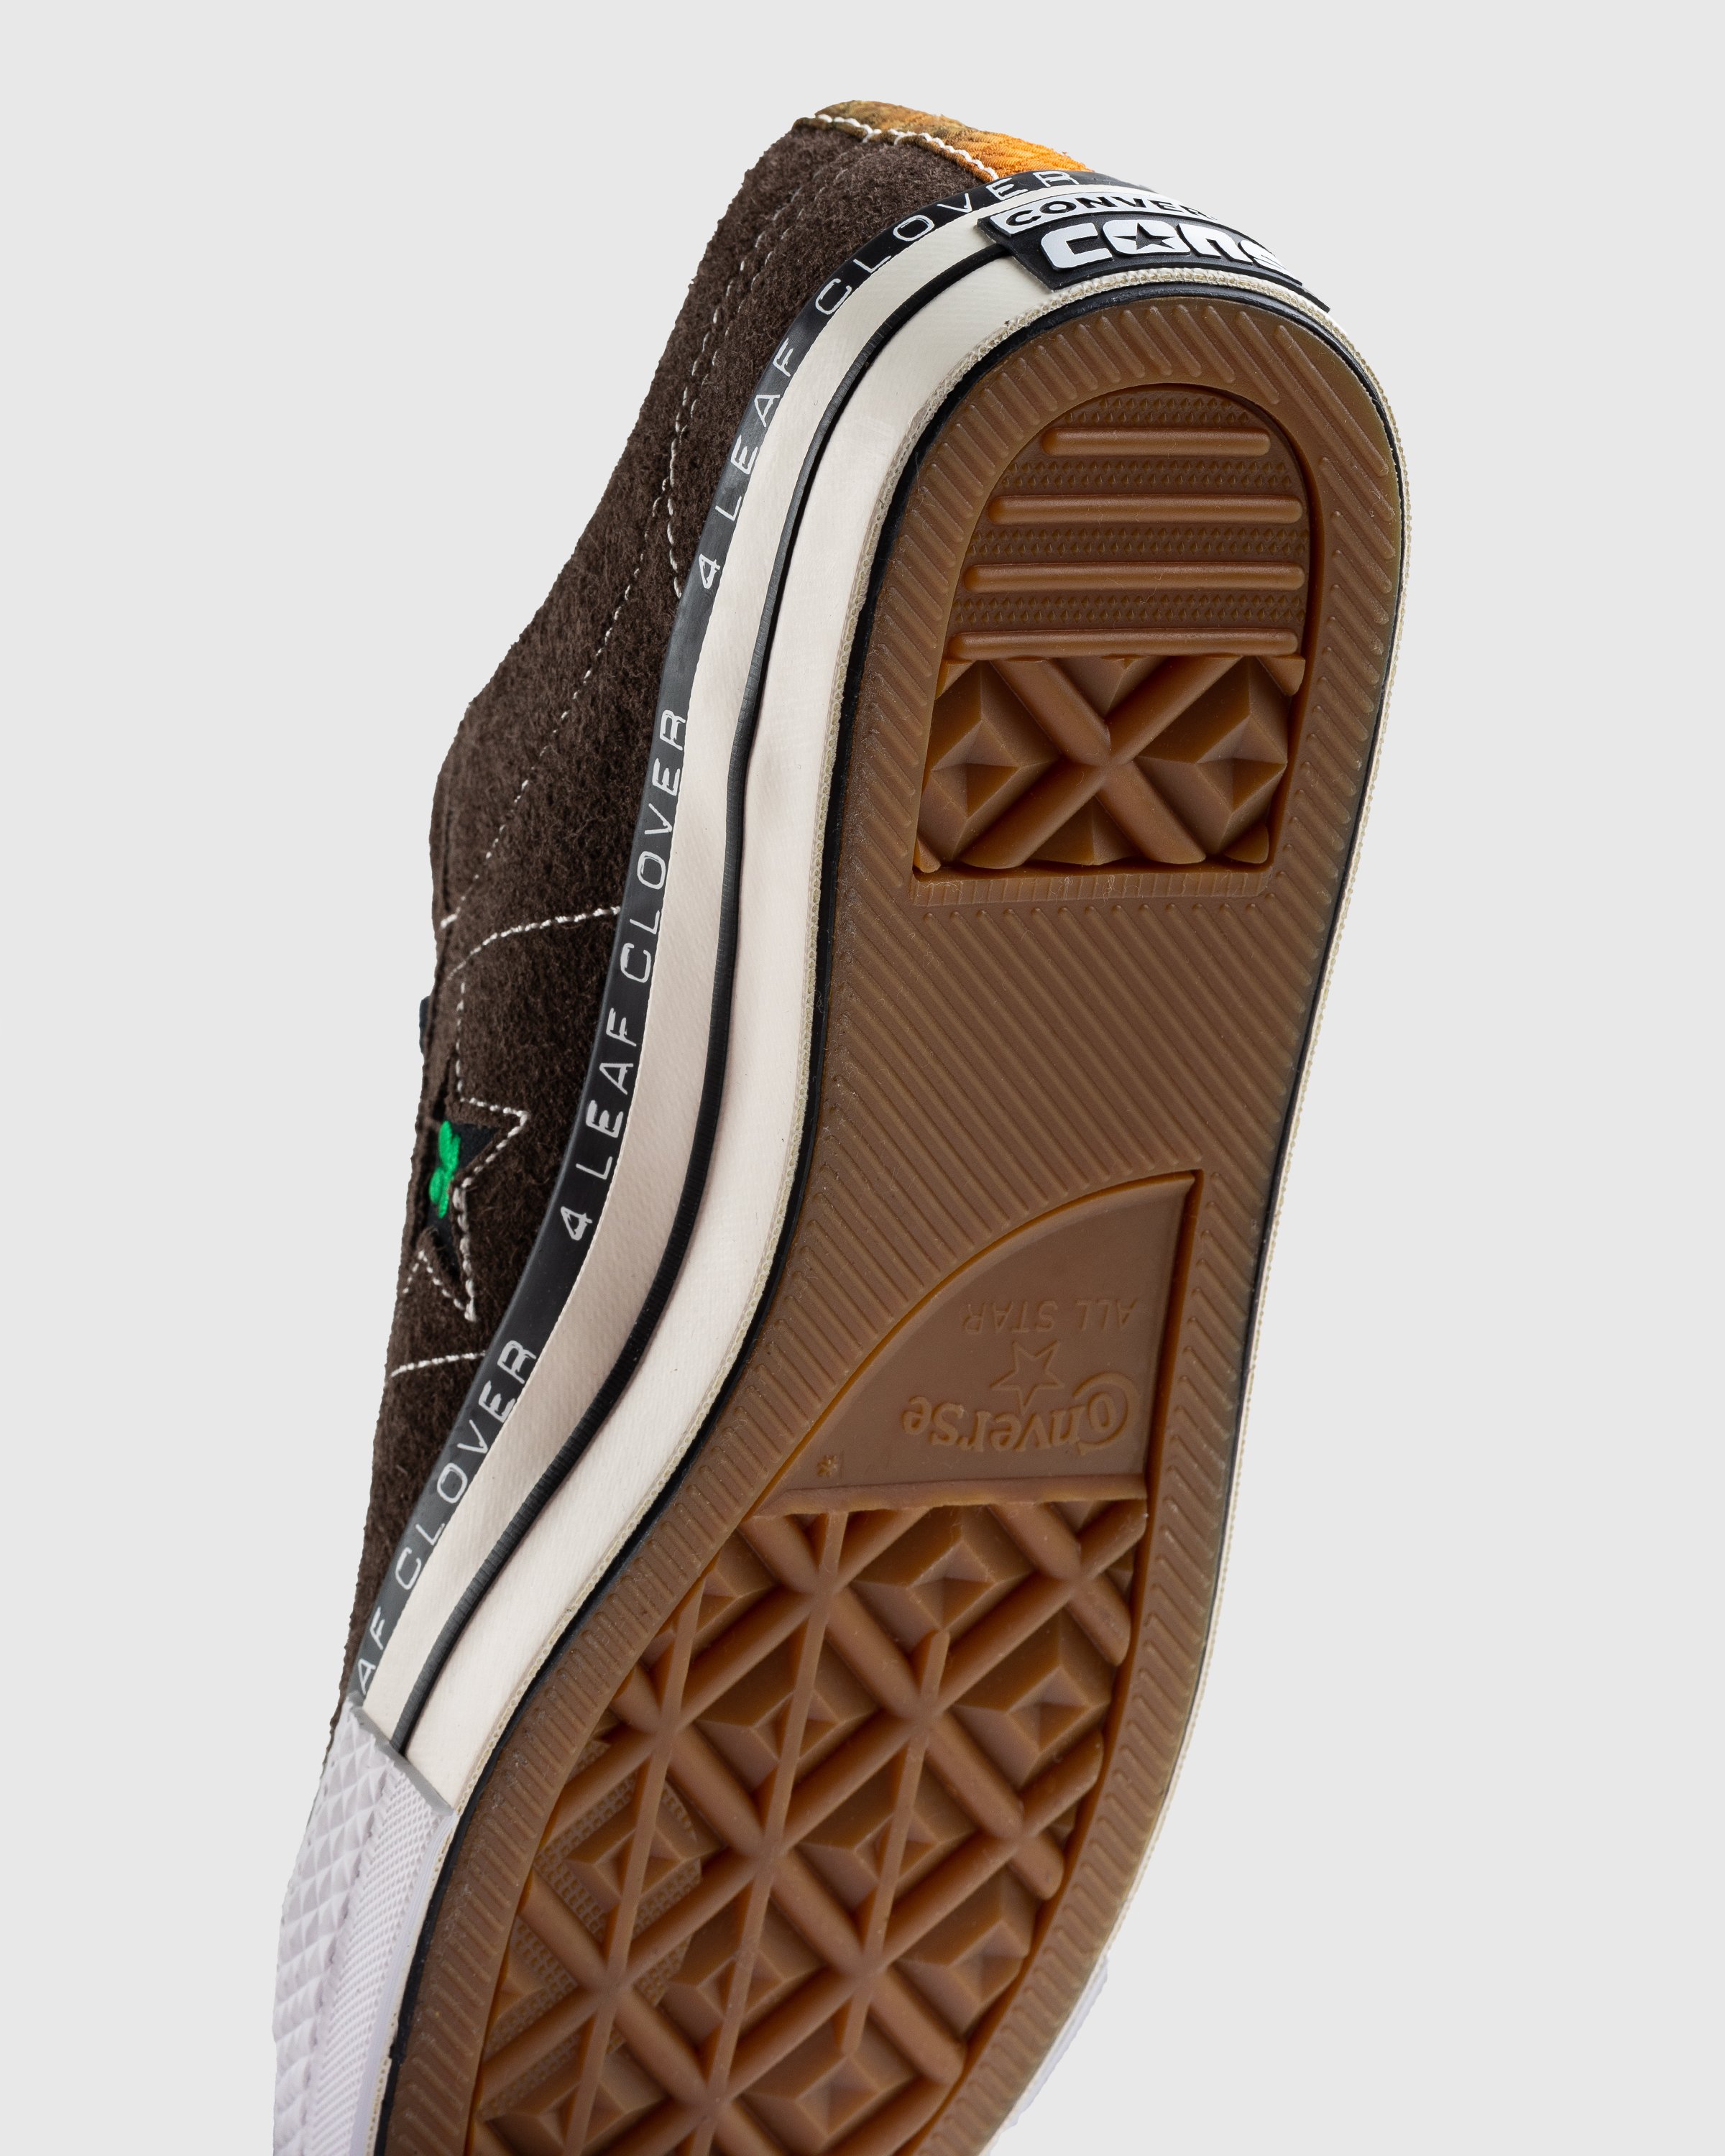 Patta x Converse - “Four Leaf Clover” One Star Pro - Footwear - Brown - Image 6